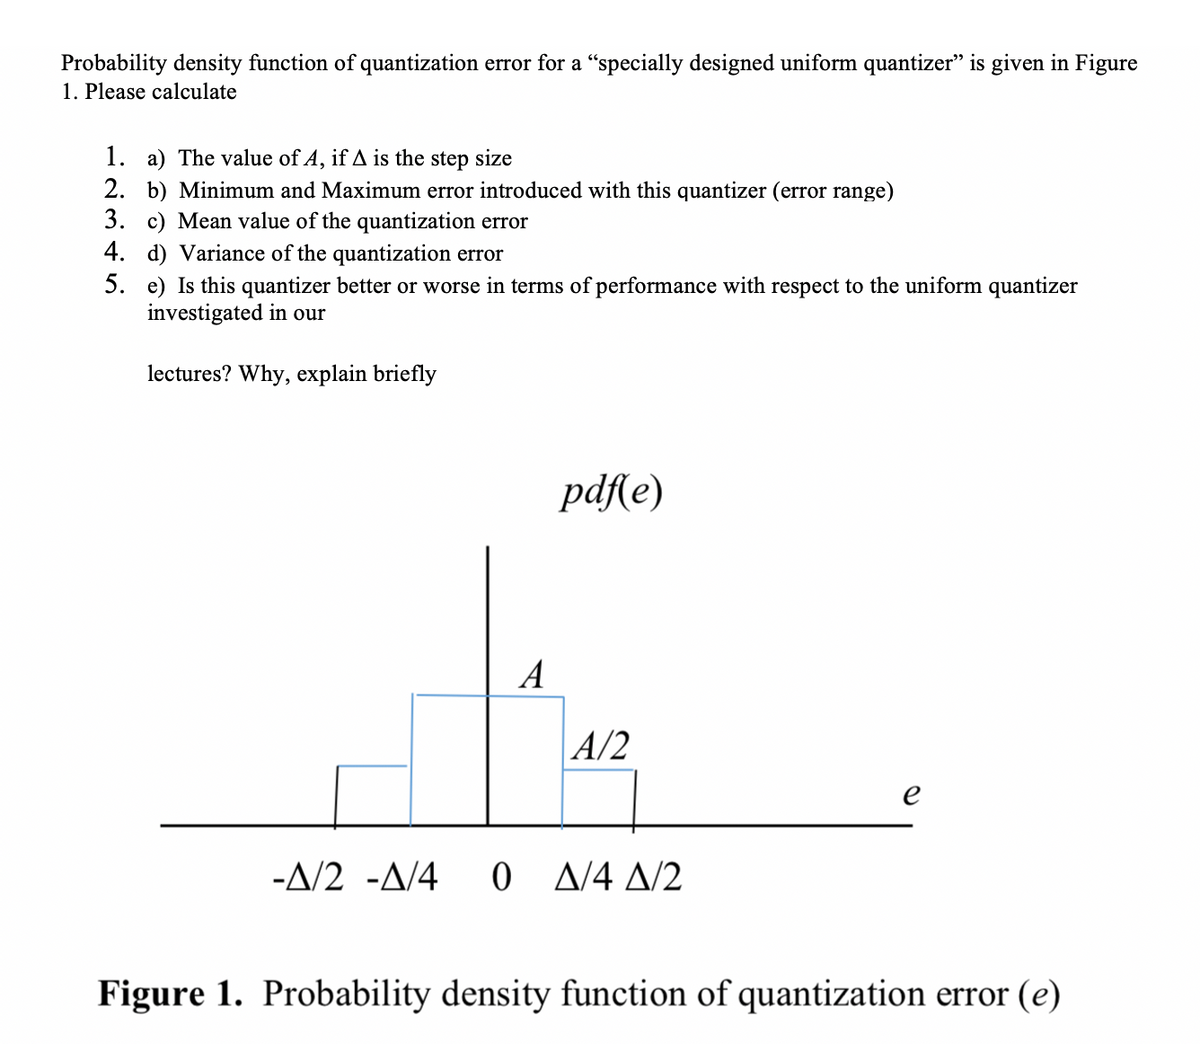 Probability density function of quantization error for a "specially designed uniform quantizer" is given in Figure
1. Please calculate
1. a) The value of A, if A is the step size
2. b) Minimum and Maximum error introduced with this quantizer (error range)
3. c) Mean value of the quantization error
4. d) Variance of the quantization error
5. e) Is this quantizer better or worse in terms of performance with respect to the uniform quantizer
investigated in our
lectures? Why, explain briefly
pdfle)
A
A/2
e
-A/2 -A/4
0 A/4 A/2
Figure 1. Probability density function of quantization error (e)
